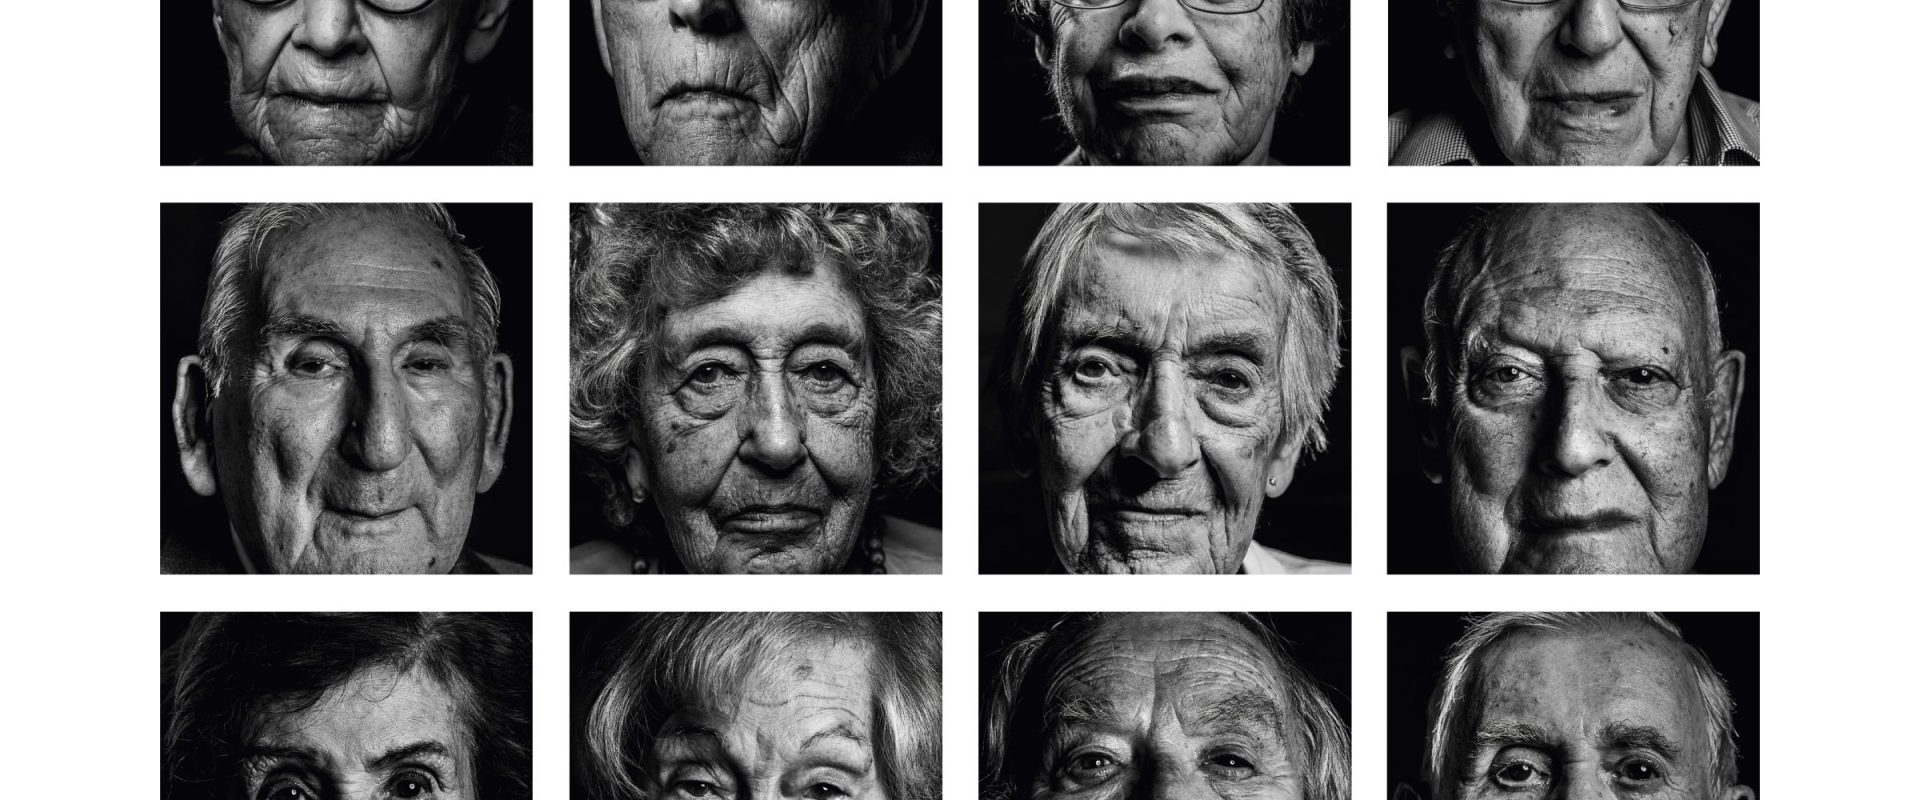 Header website image - Black and white photograph composite of Holocaust survivors who have participated in the My Voice Project.